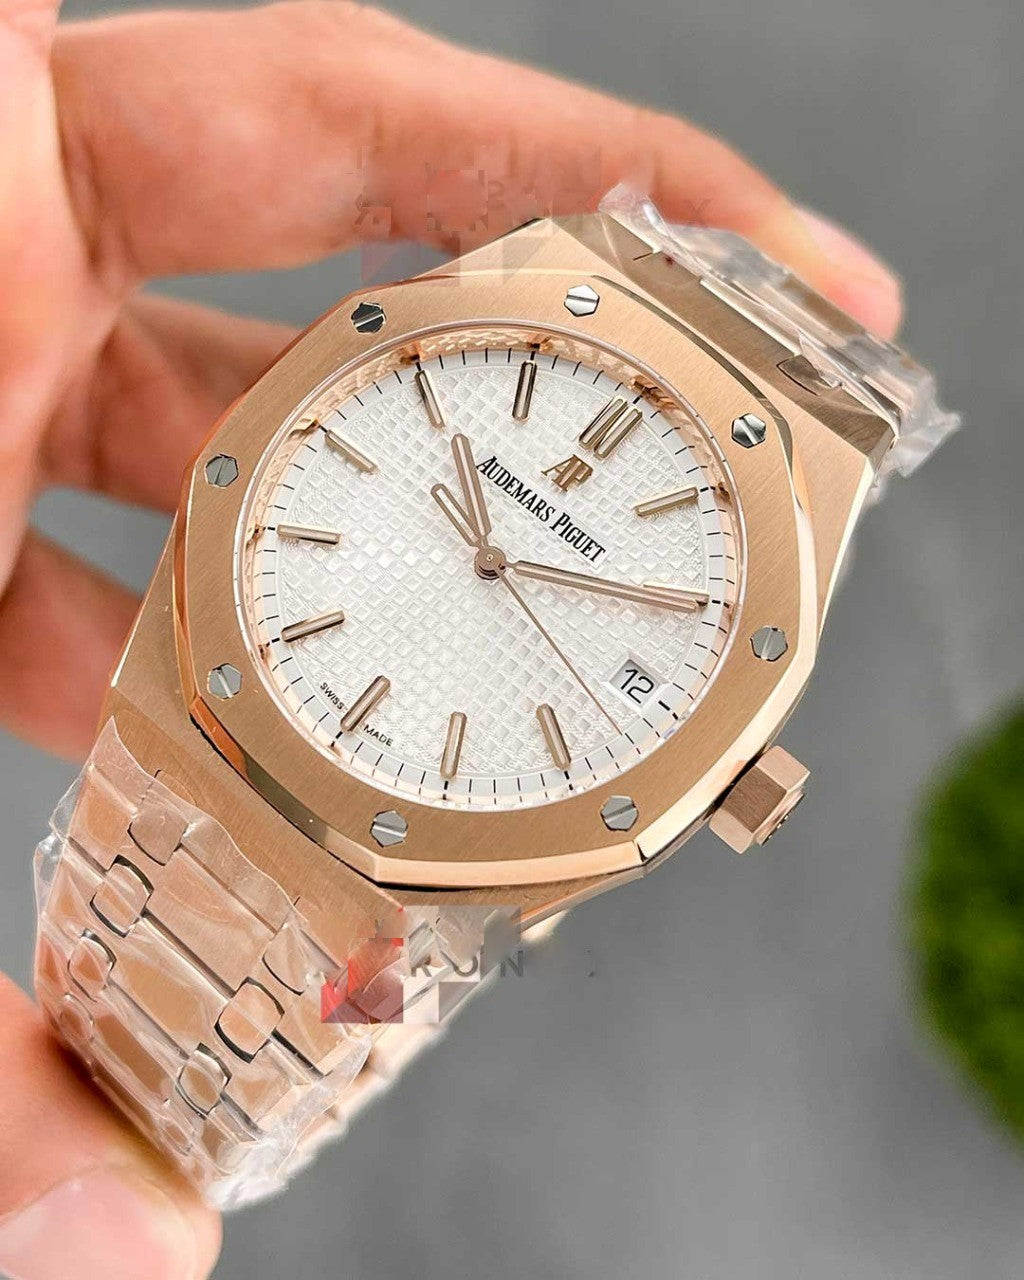 Audemars Piguet Royal Oak Selfwinding Extra-Thin In A Luscious New Plum Tone Dial New Arrival For Man With White crocodile Dial Design Watch AP-55092